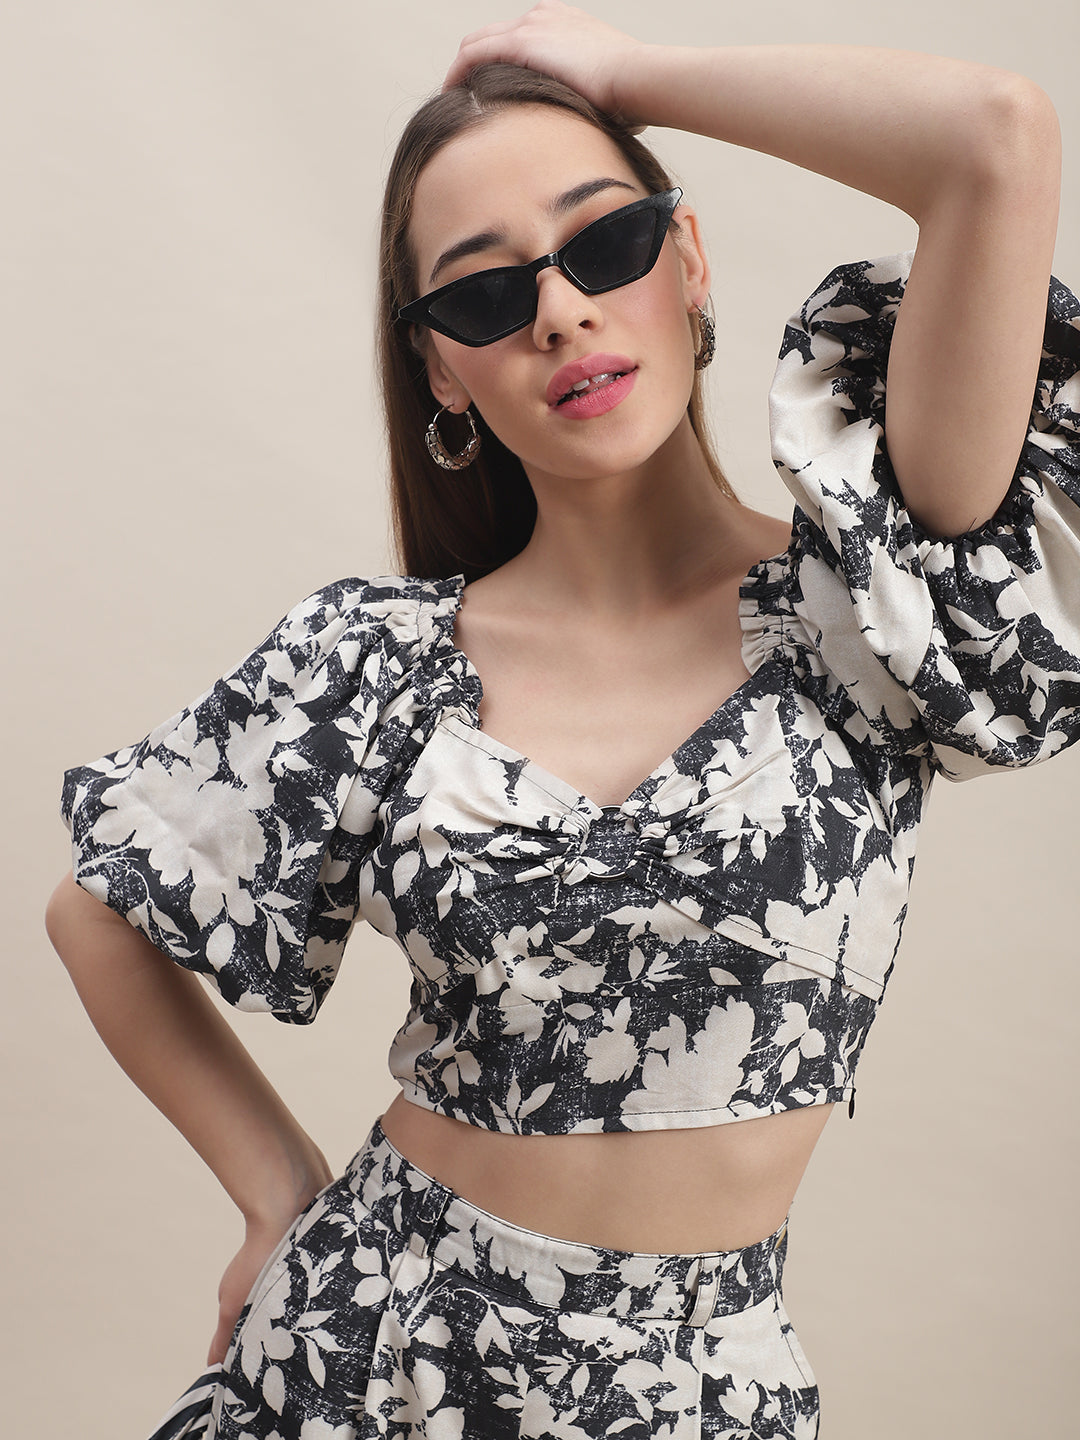 Melon Sleeve Crop Top With Pants Co-Ord Set